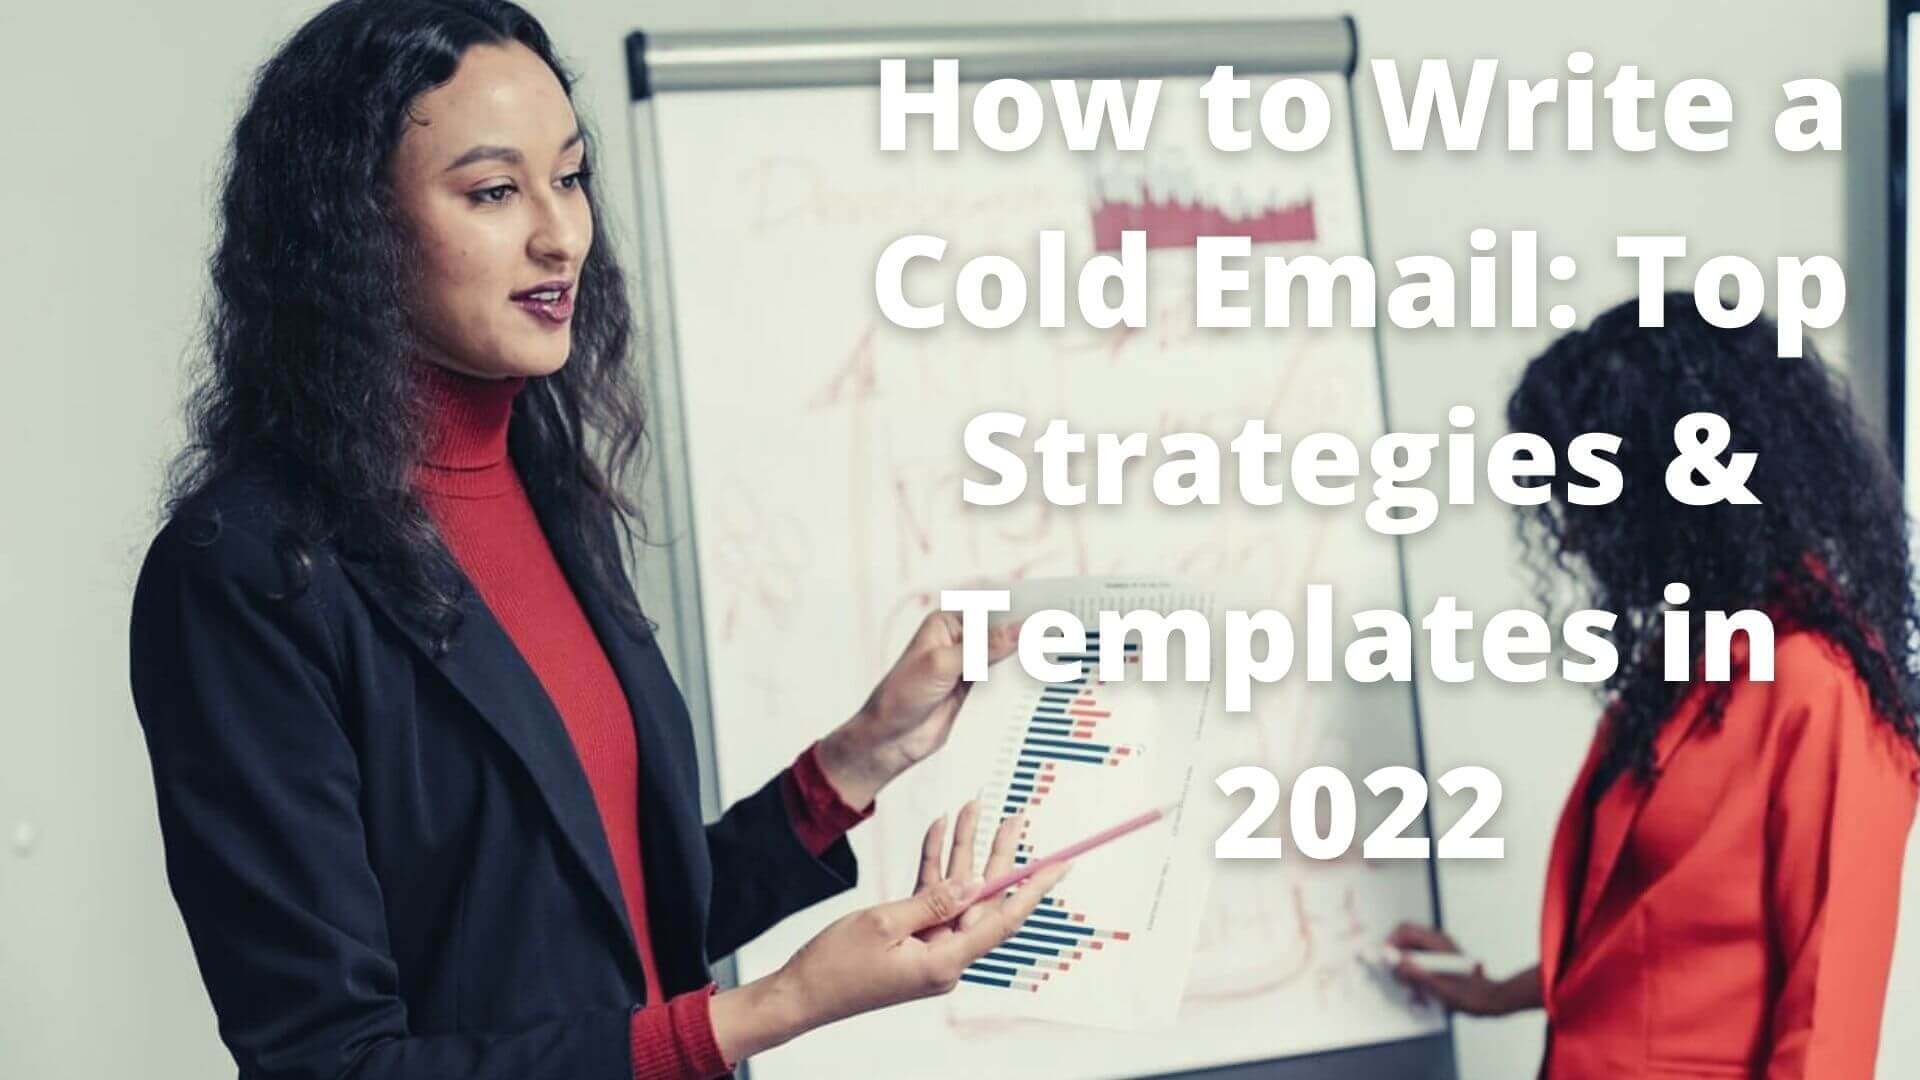 How to Write a Cold Email: Top Strategies & Templates in 2022